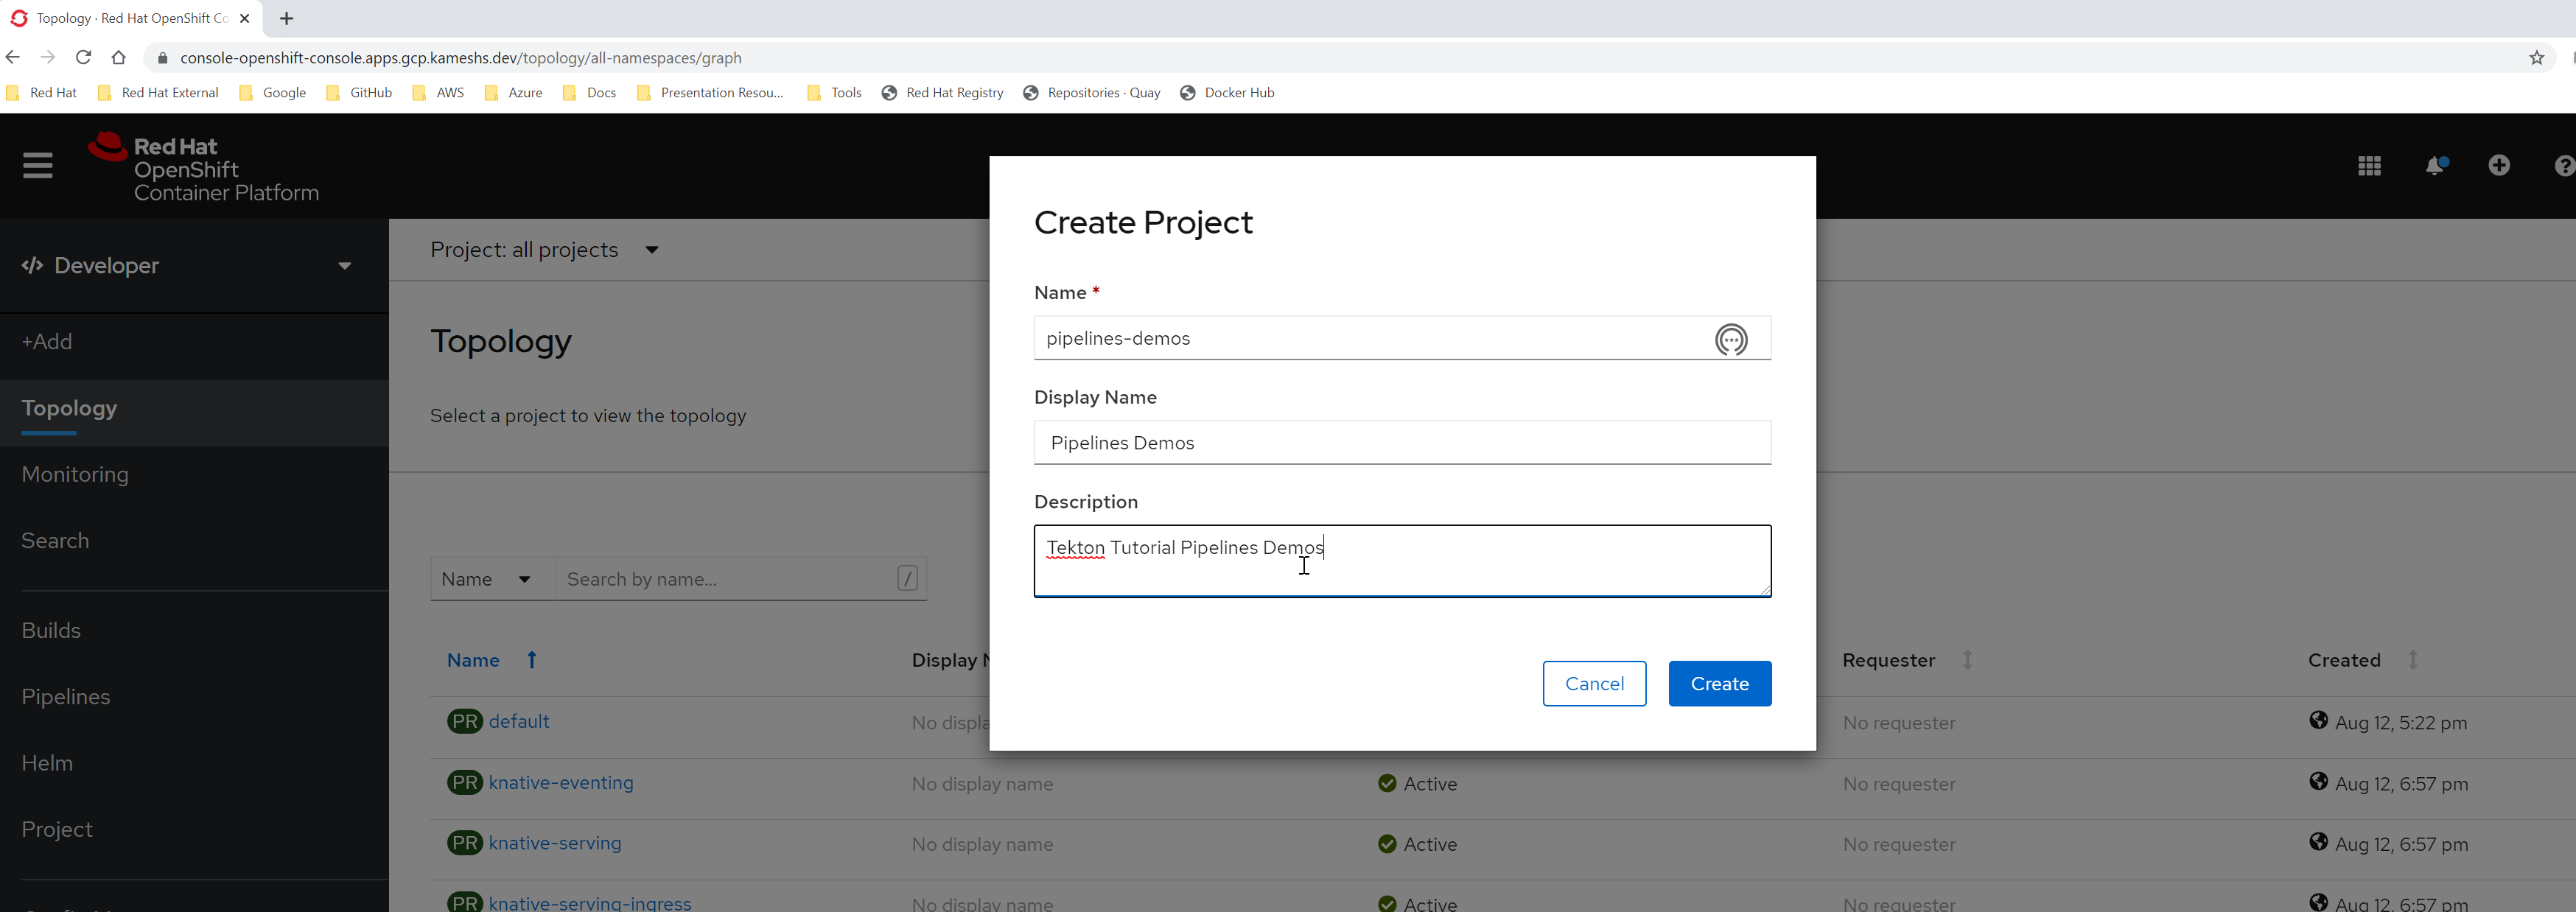 odc create project pipelines demos